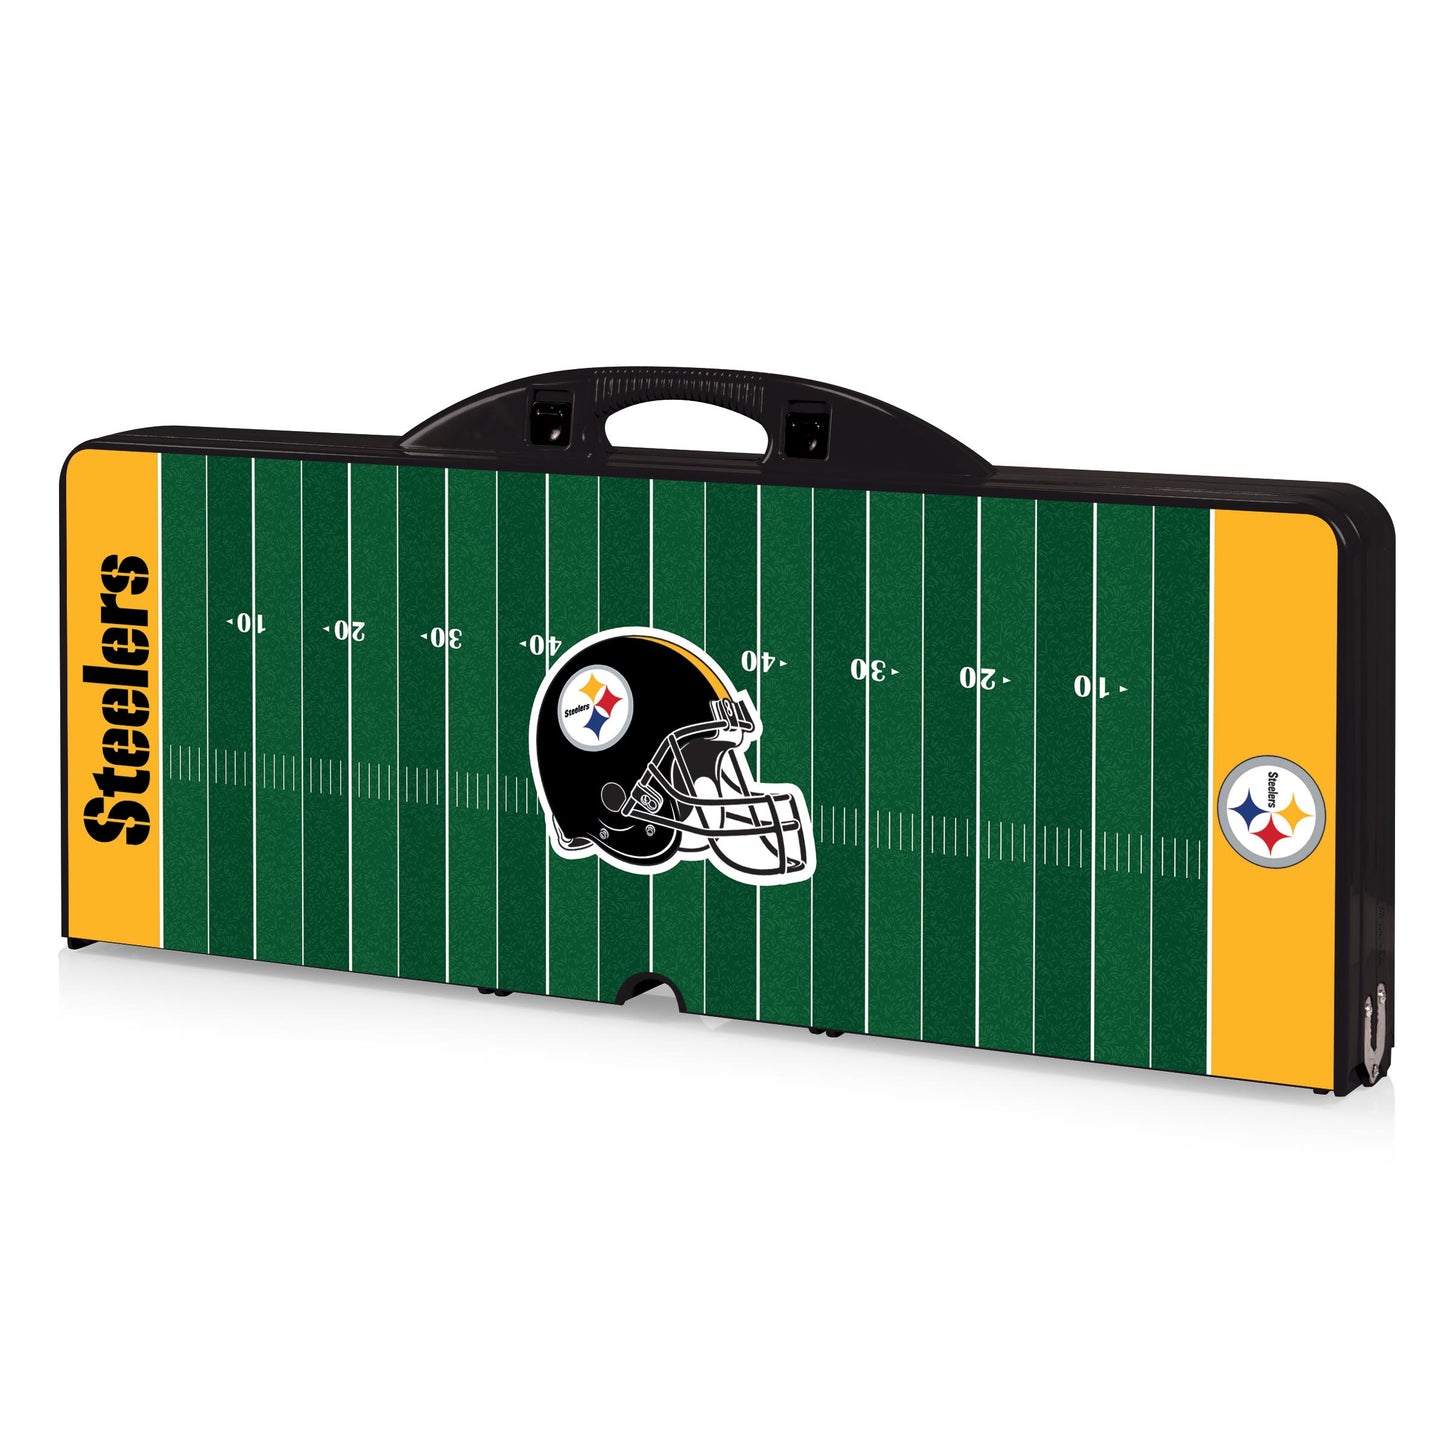 Pittsburgh Steelers - Picnic Table Portable Folding Table with Seats - Football Field Style